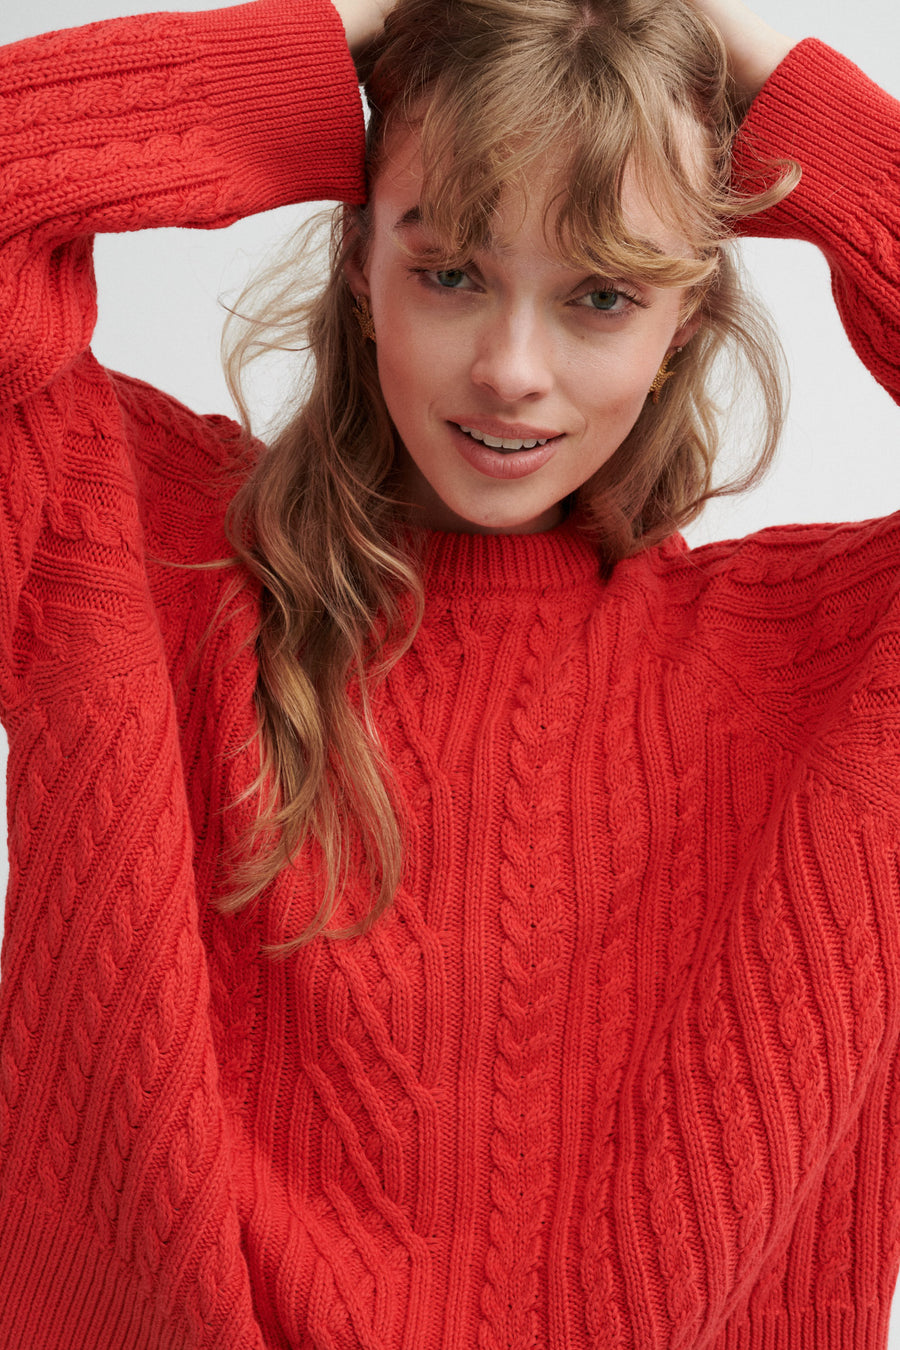 Sweater in organic cotton / 16 / 14 / orchid red